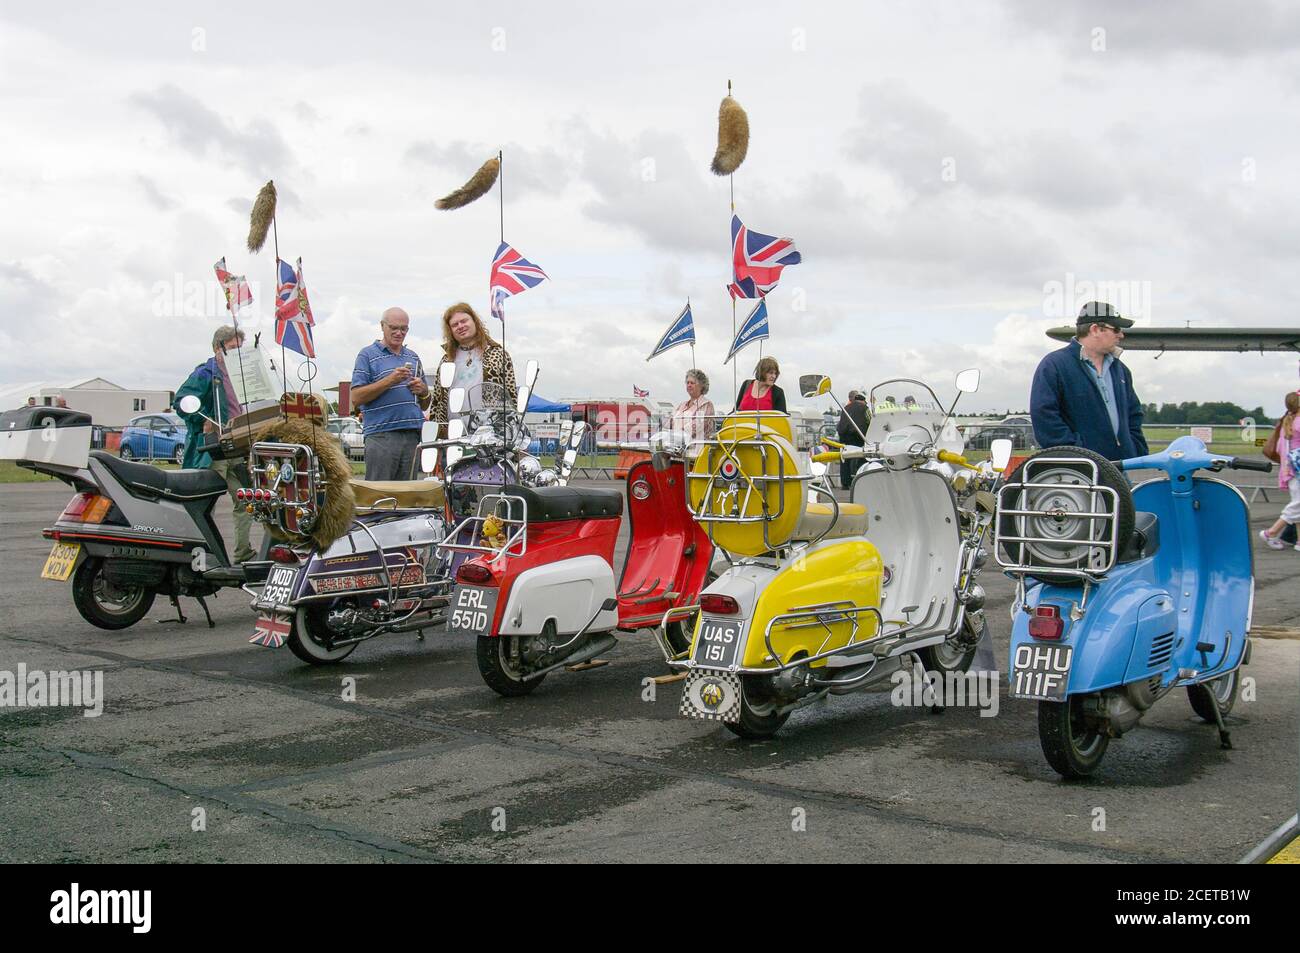 A line-up of old motor scooters on display at a Country Fair in Gloucestershire England UK Stock Photo